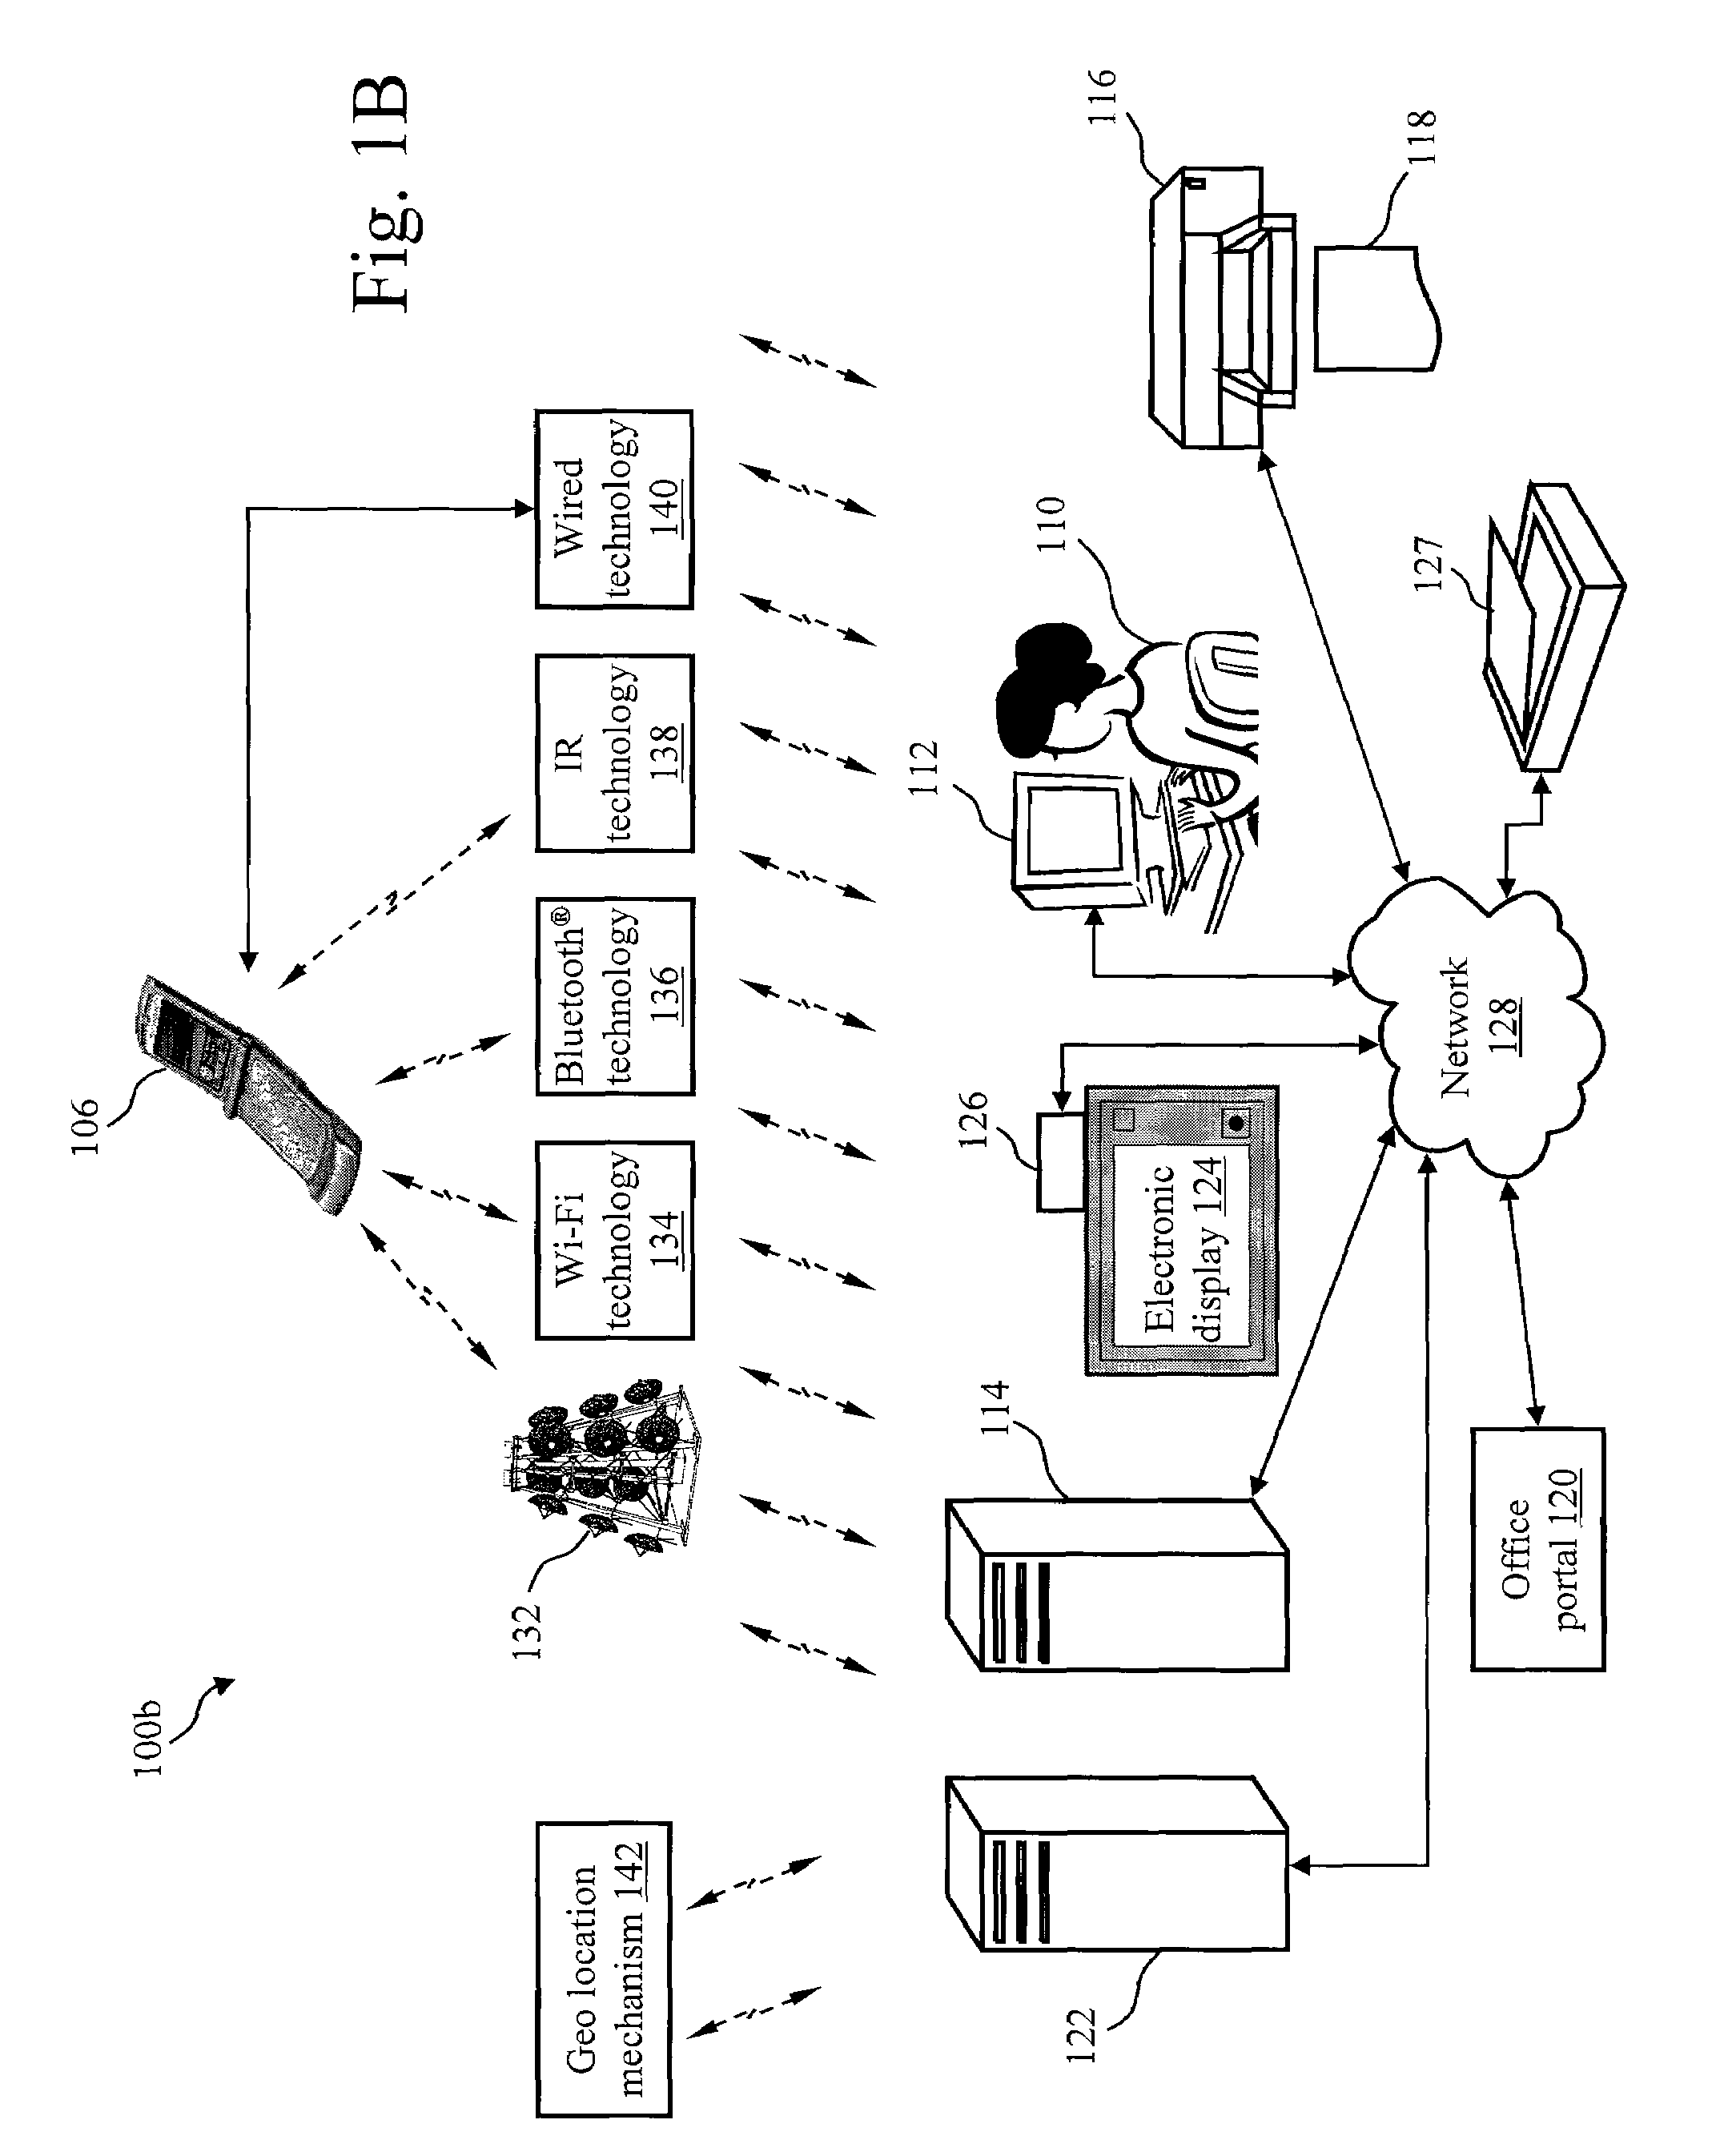 System and methods for creation and use of a mixed media environment